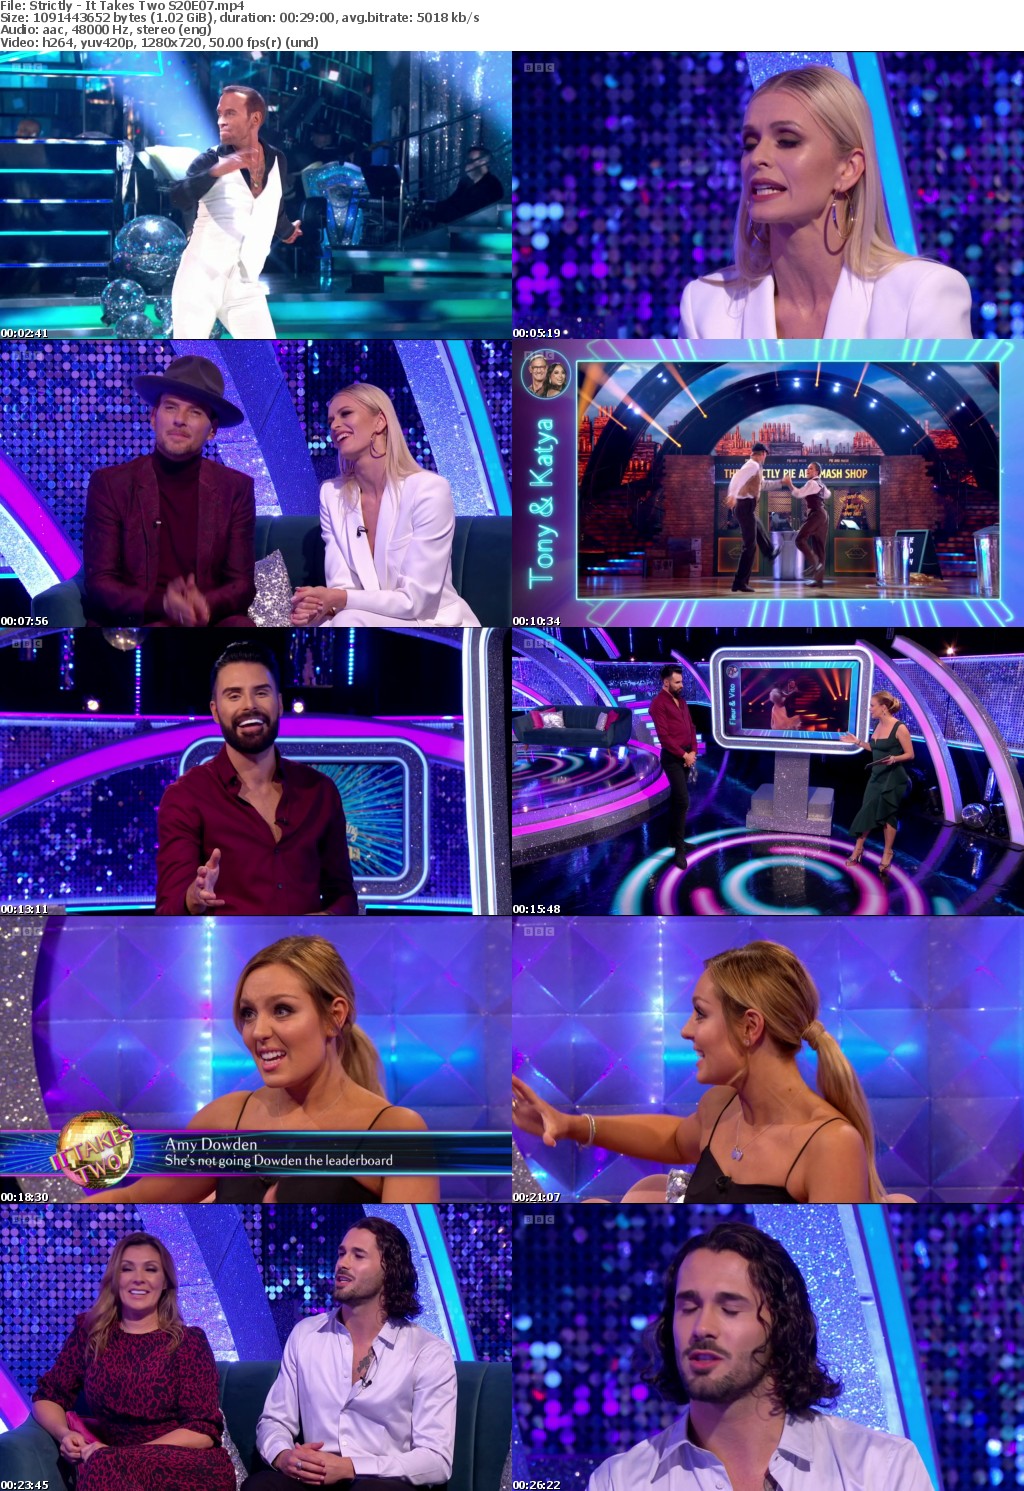 Strictly - It Takes Two S20E7 (1280x720p HD, 50fps, soft Eng subs)